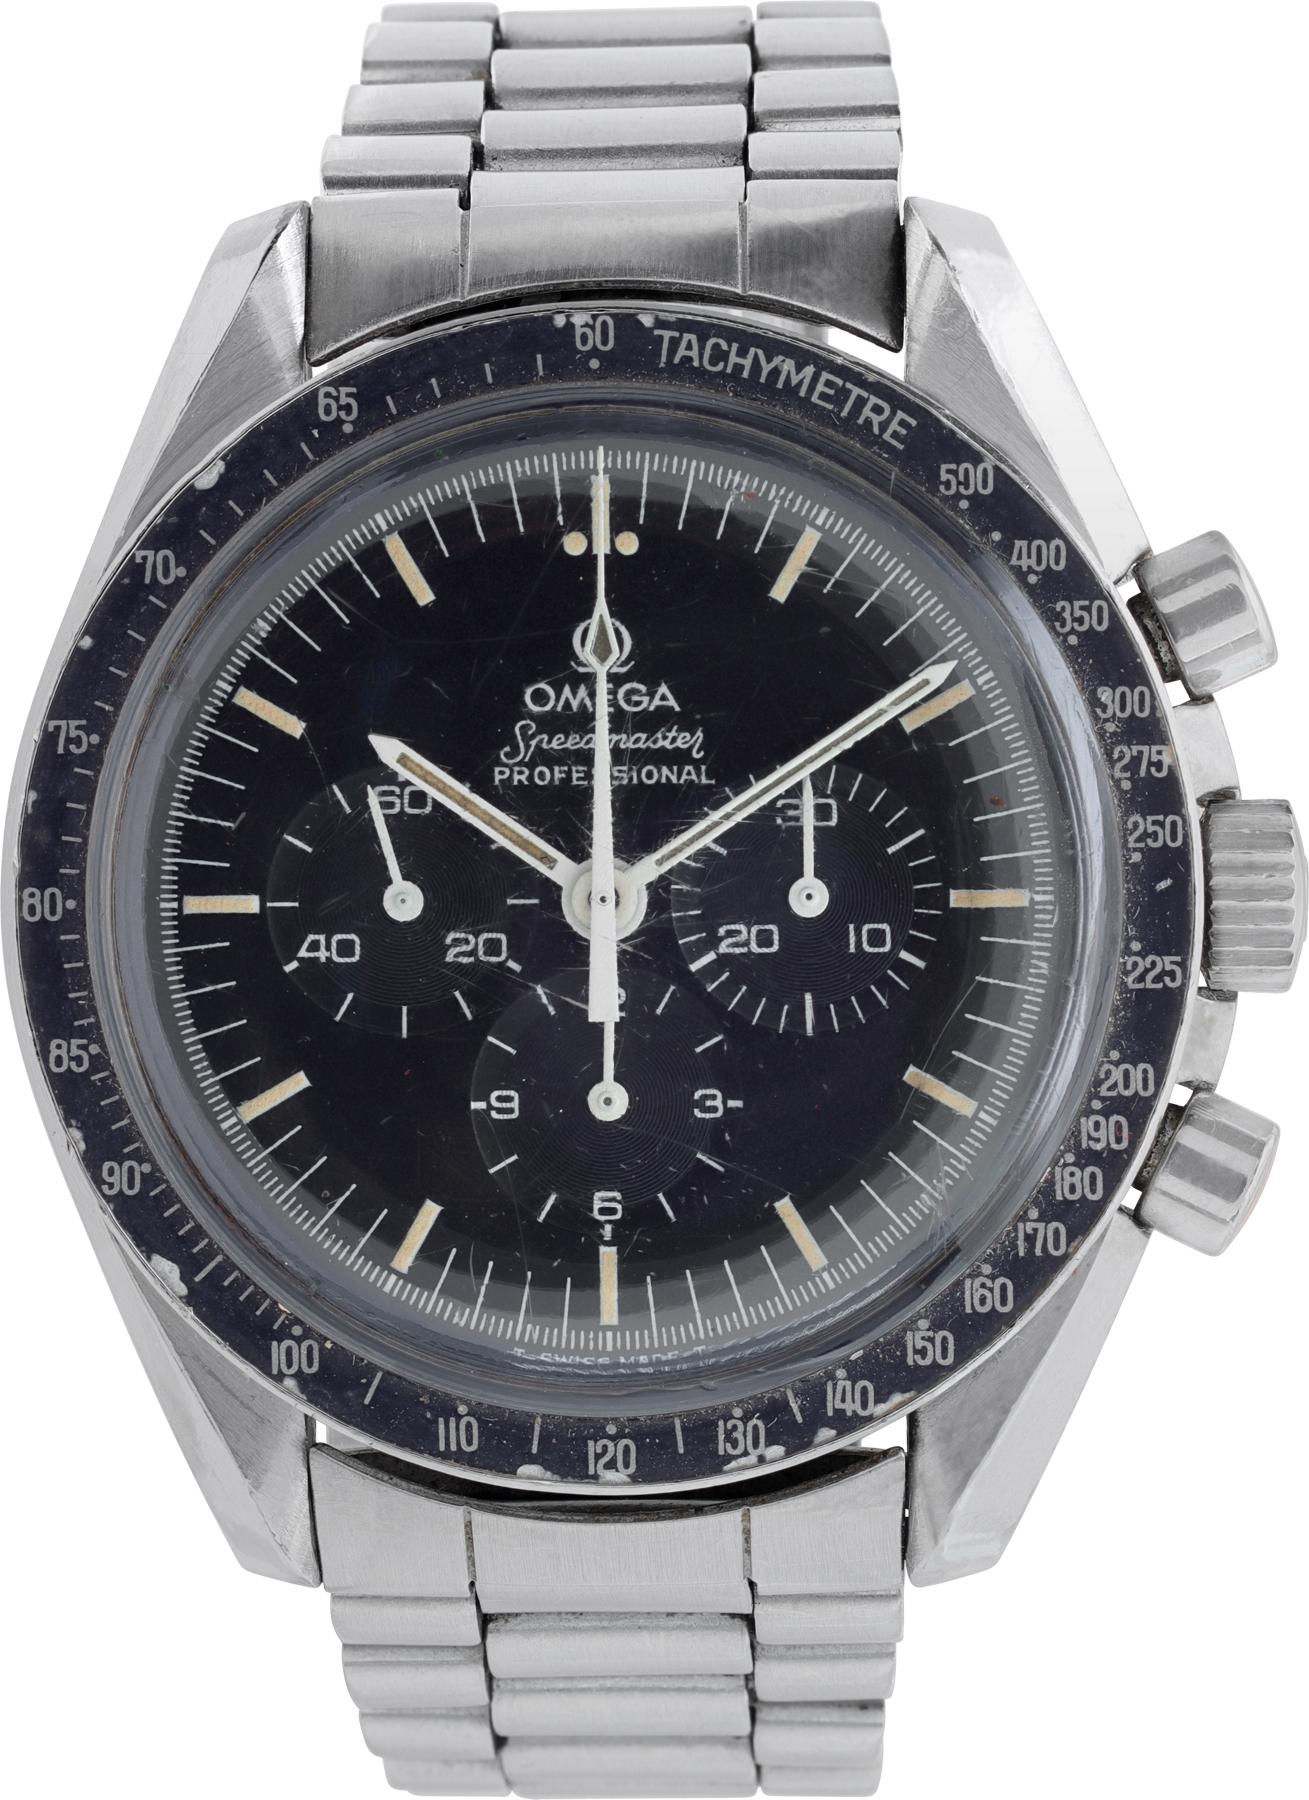 Omega Speedmaster "The First Watch Worn on the Moon" 42mm 145.022-76st